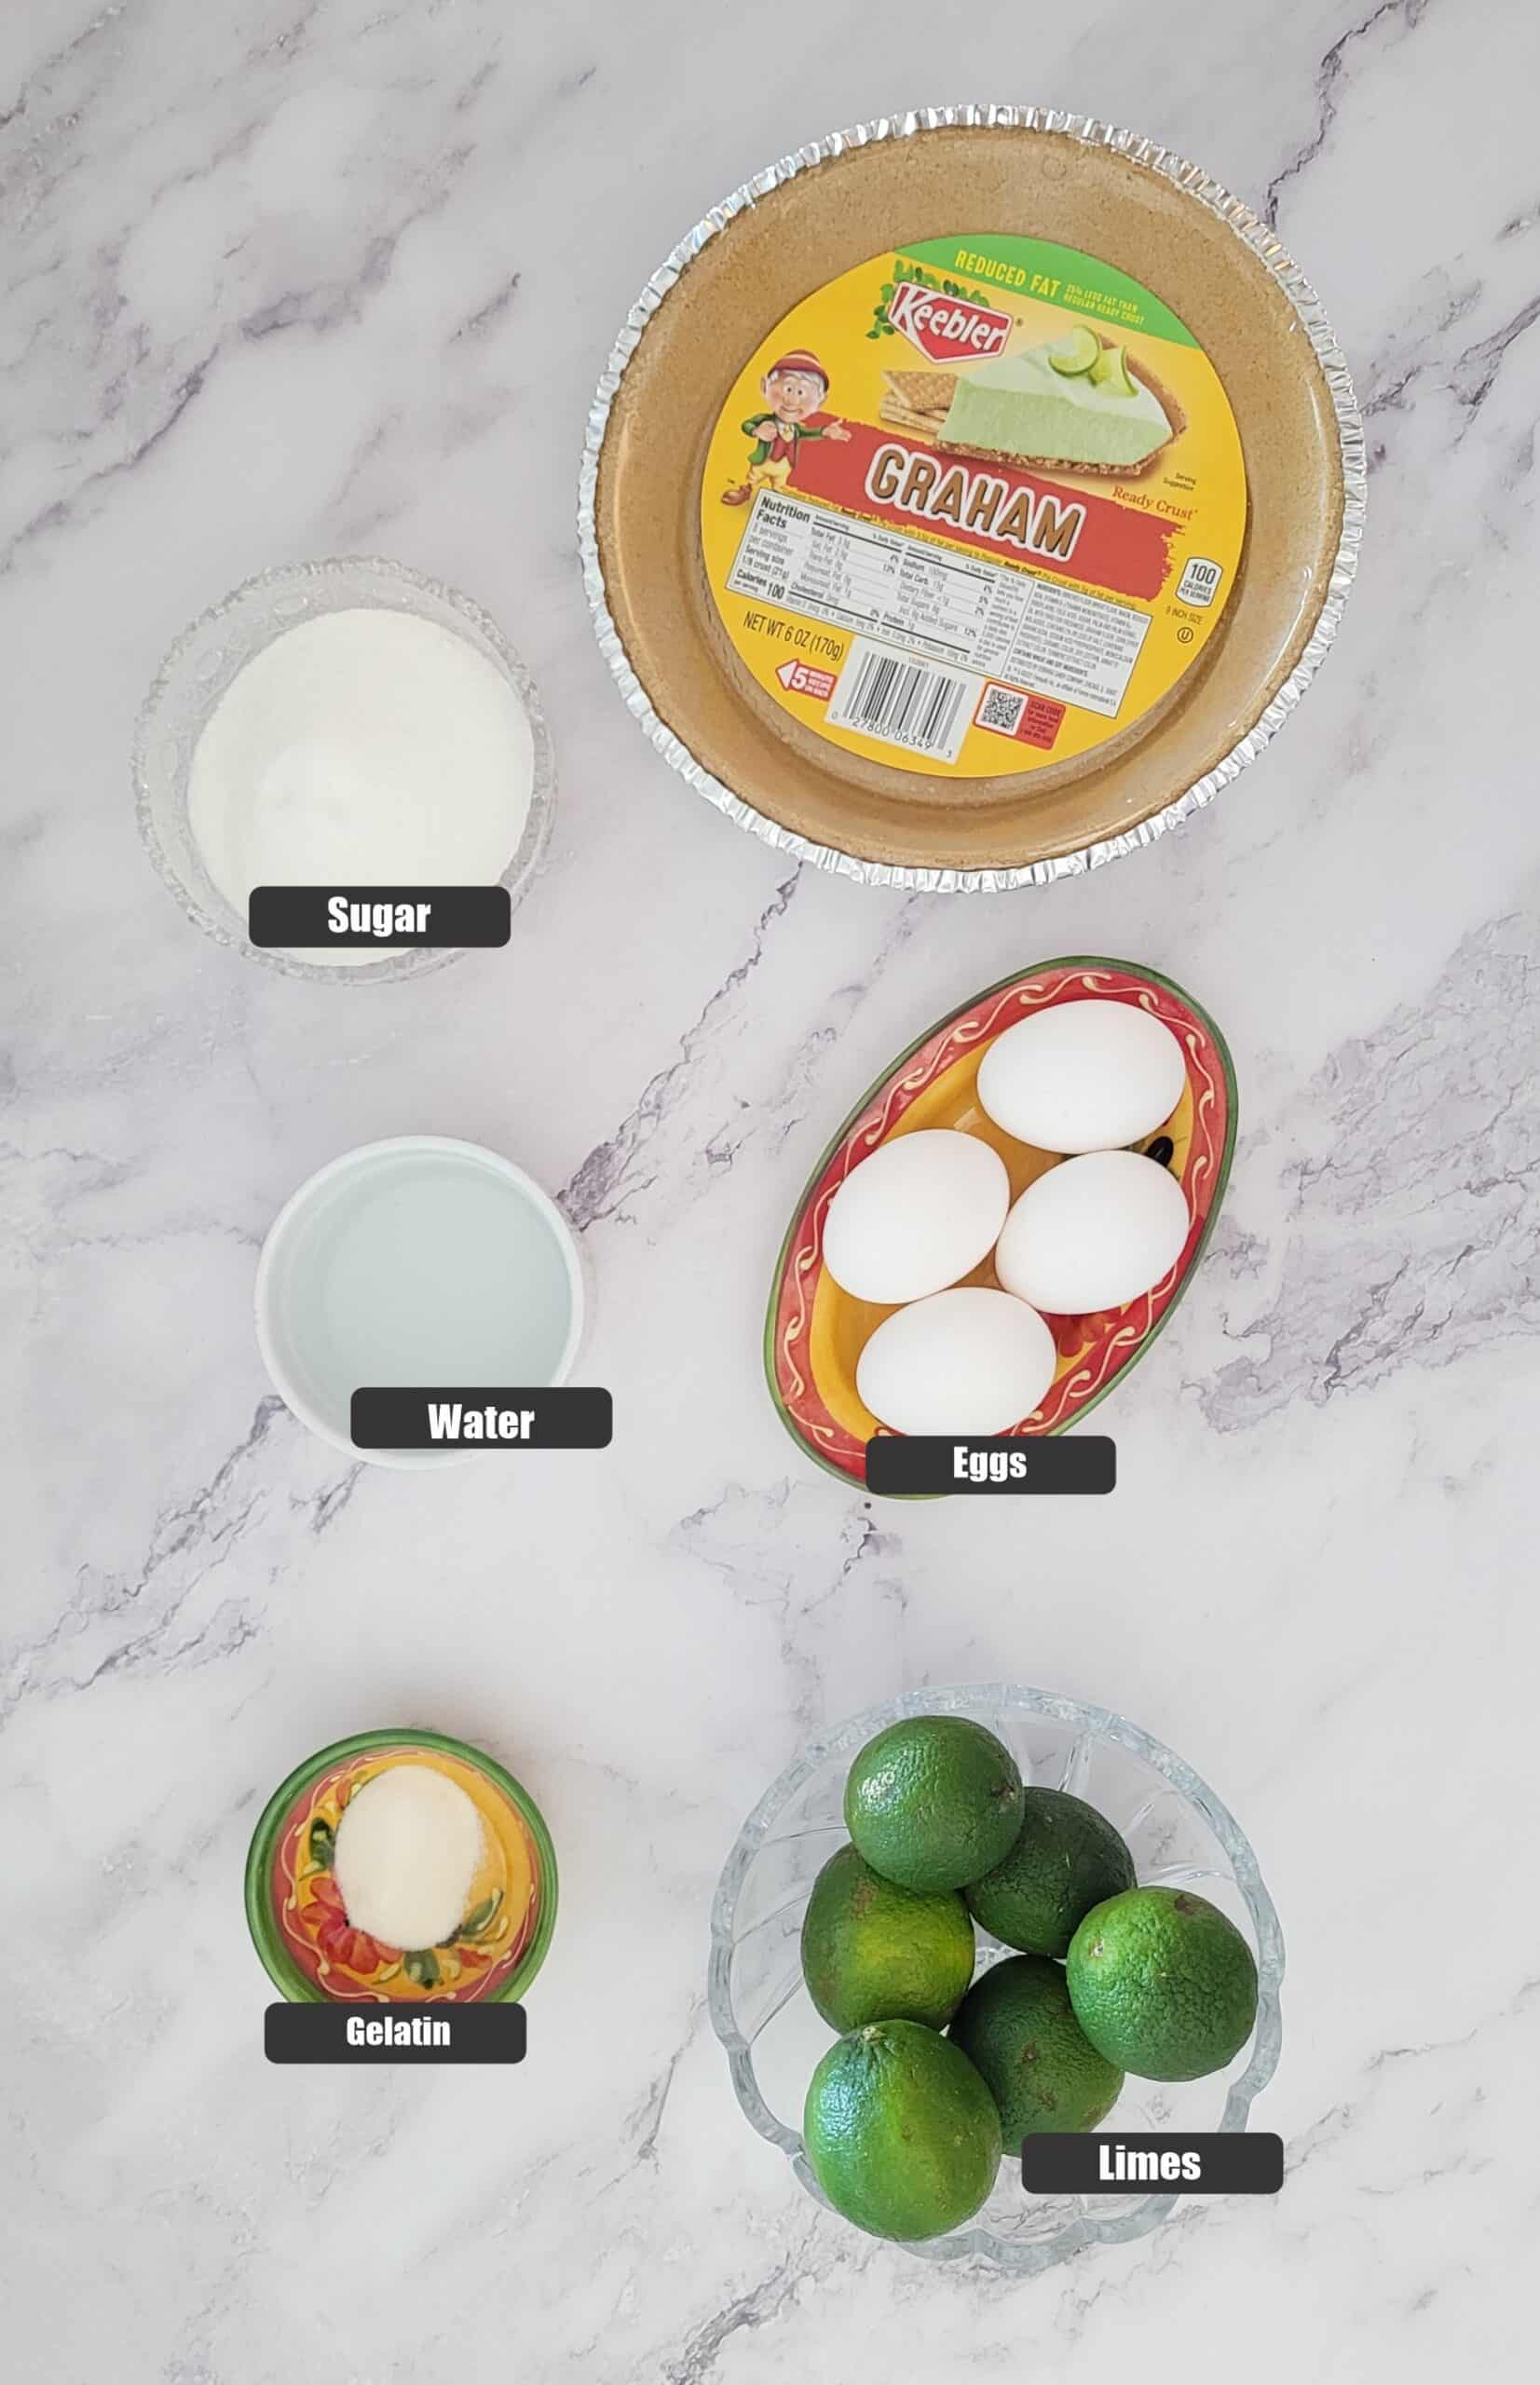 ingredients needed to make the lime chiffon pie including eggs, limes, water, sugar, gelatin and a pie crust